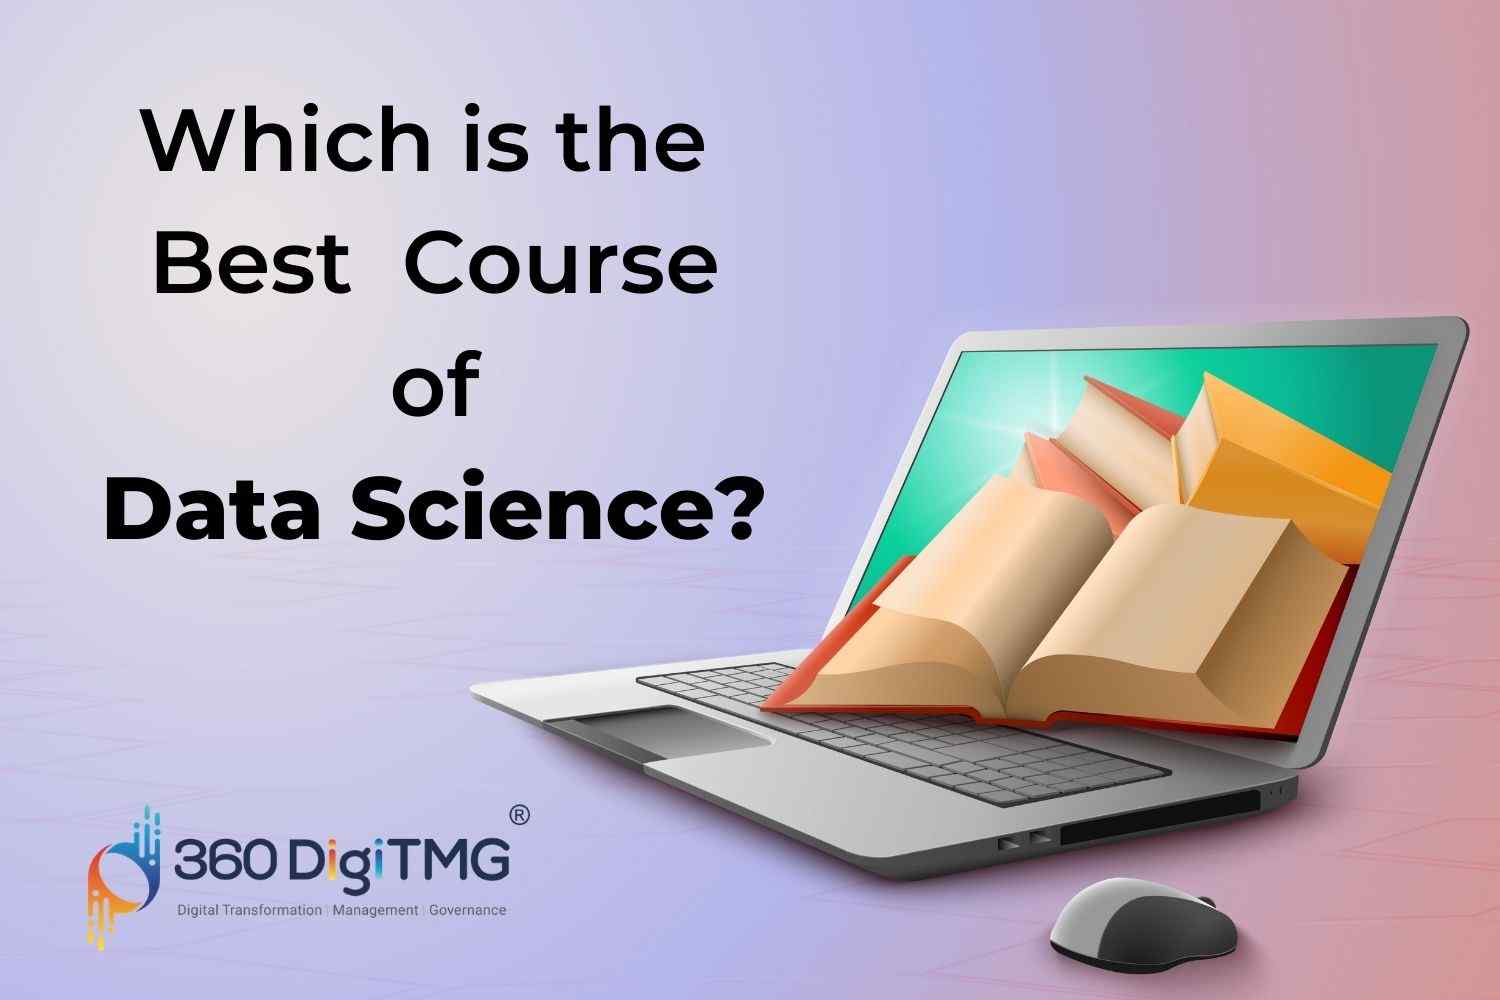 Which is the Best Course of Data Science?